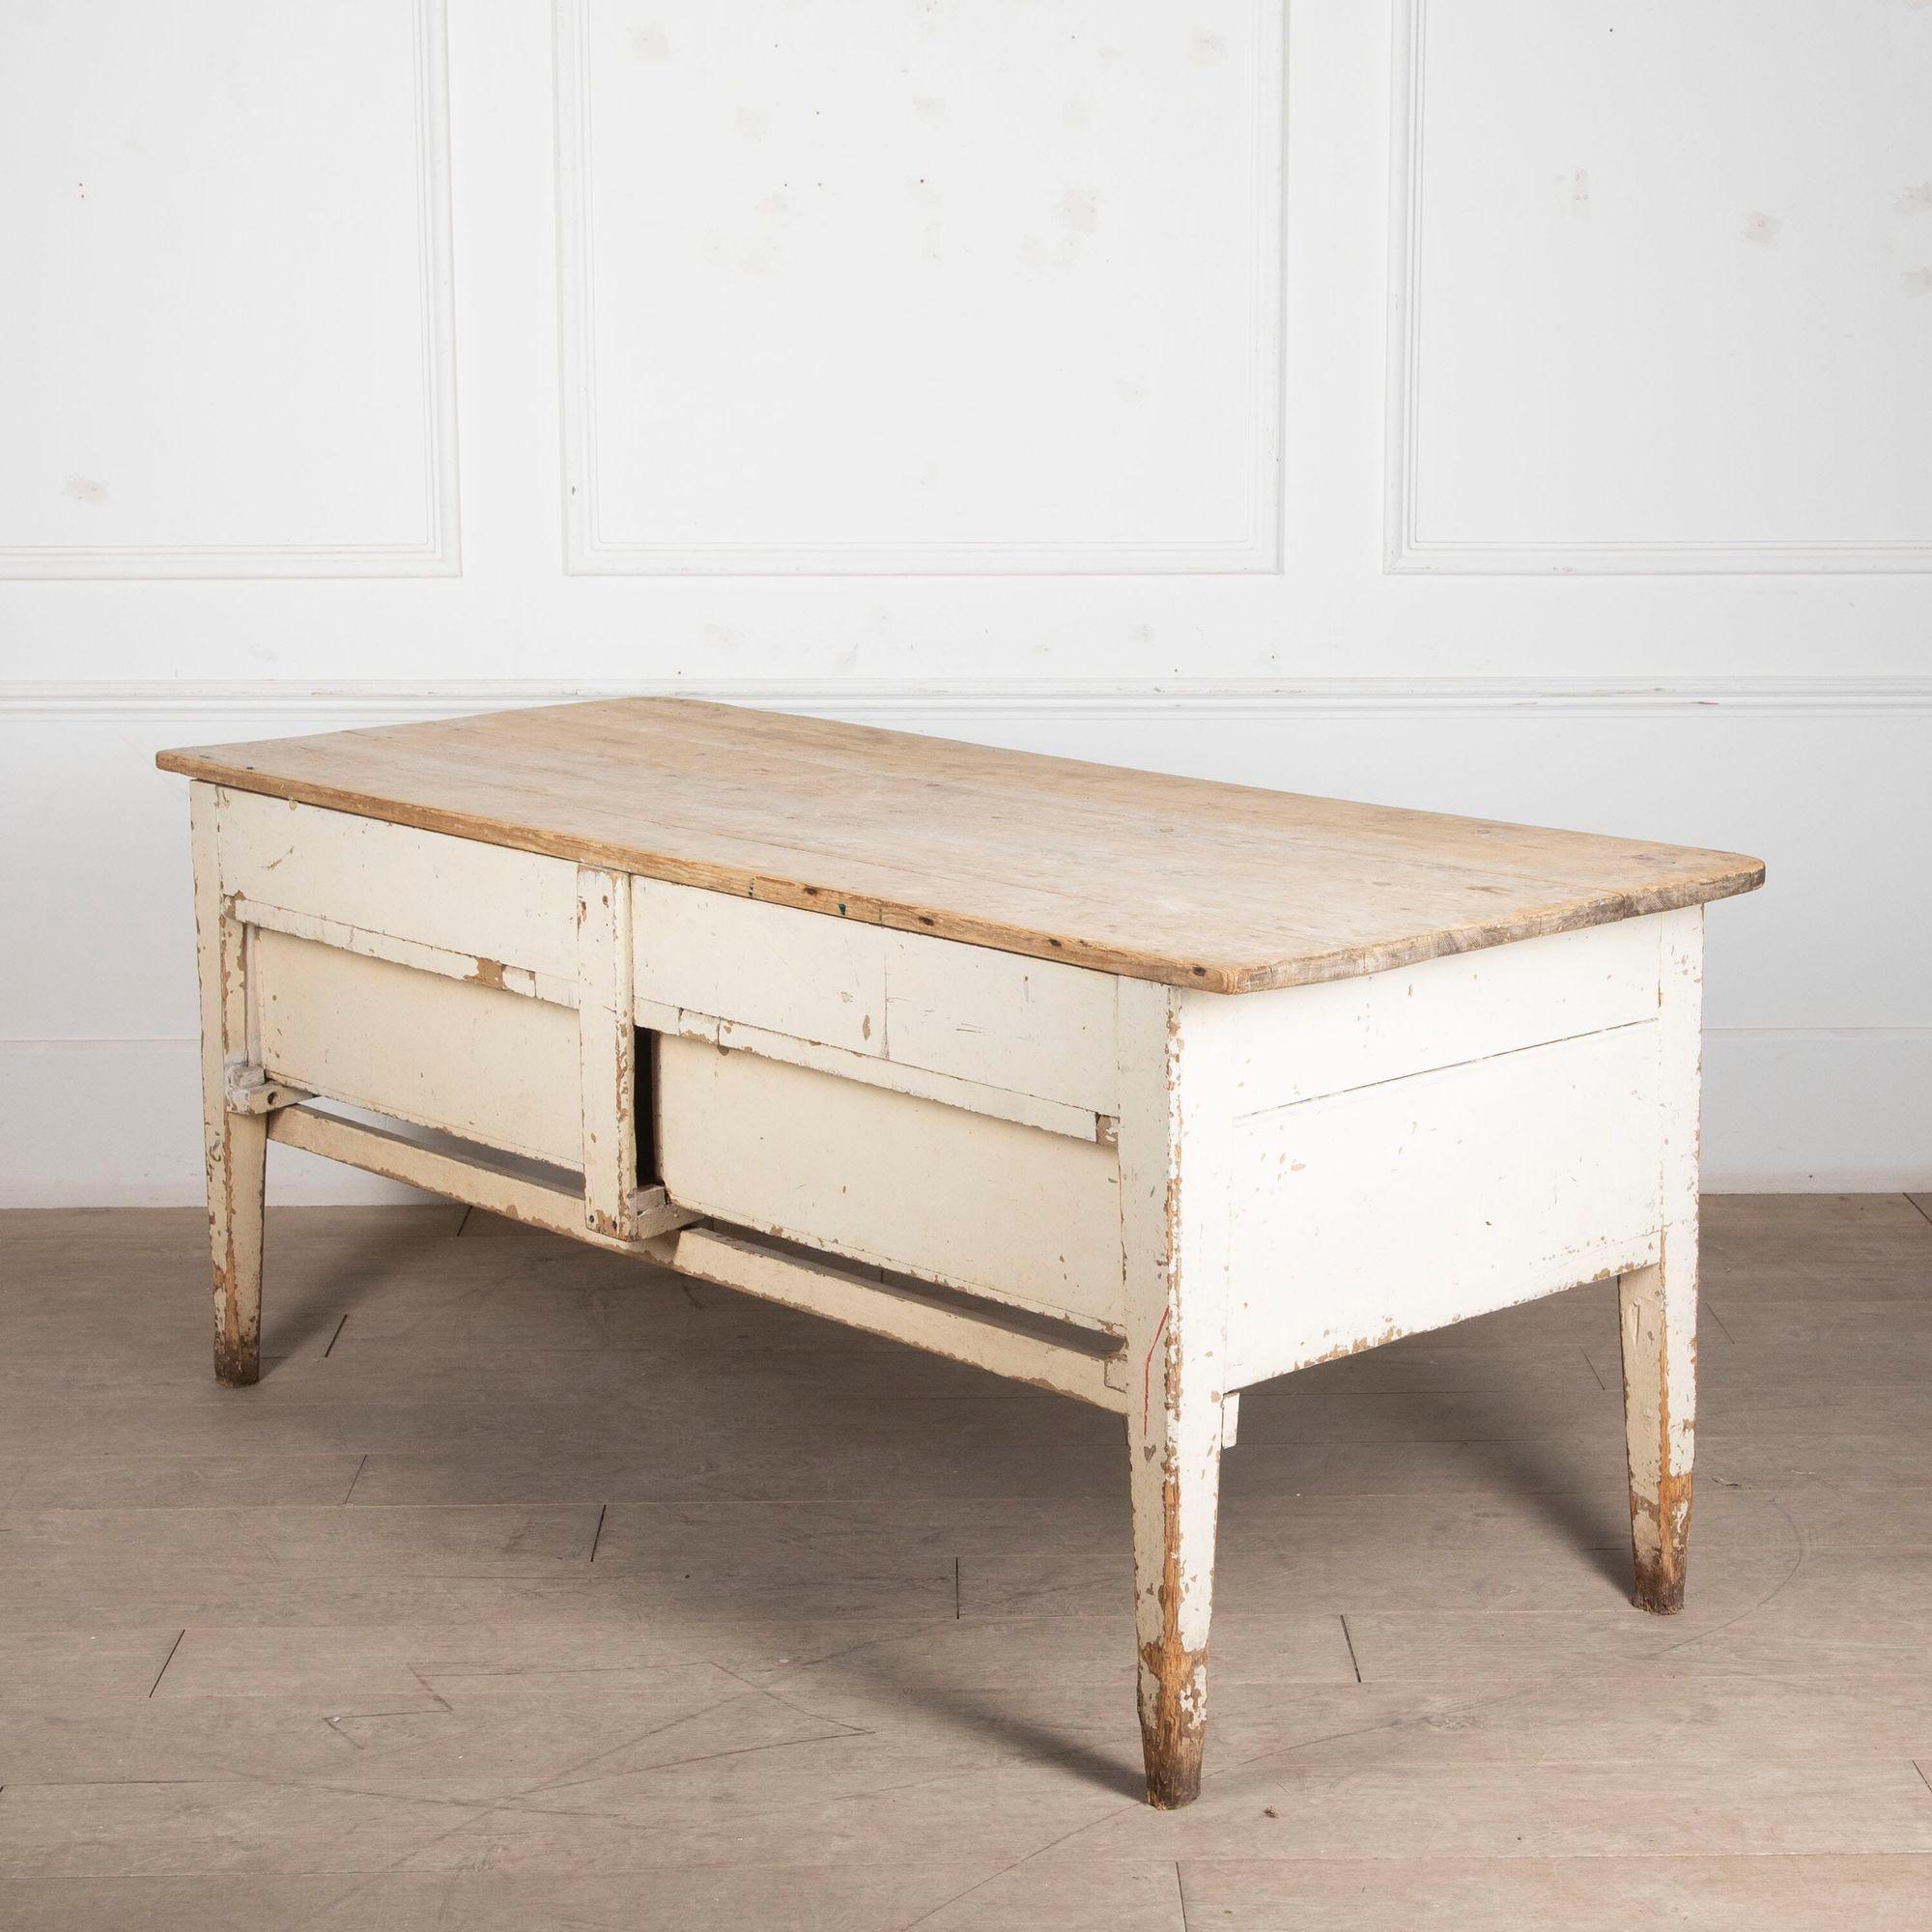 19th century Scottish country house kitchen preparation table. 
With a scrubbed top and five decorative drawers in historic paint.
Perfect for a kitchen or provencal style hallway.